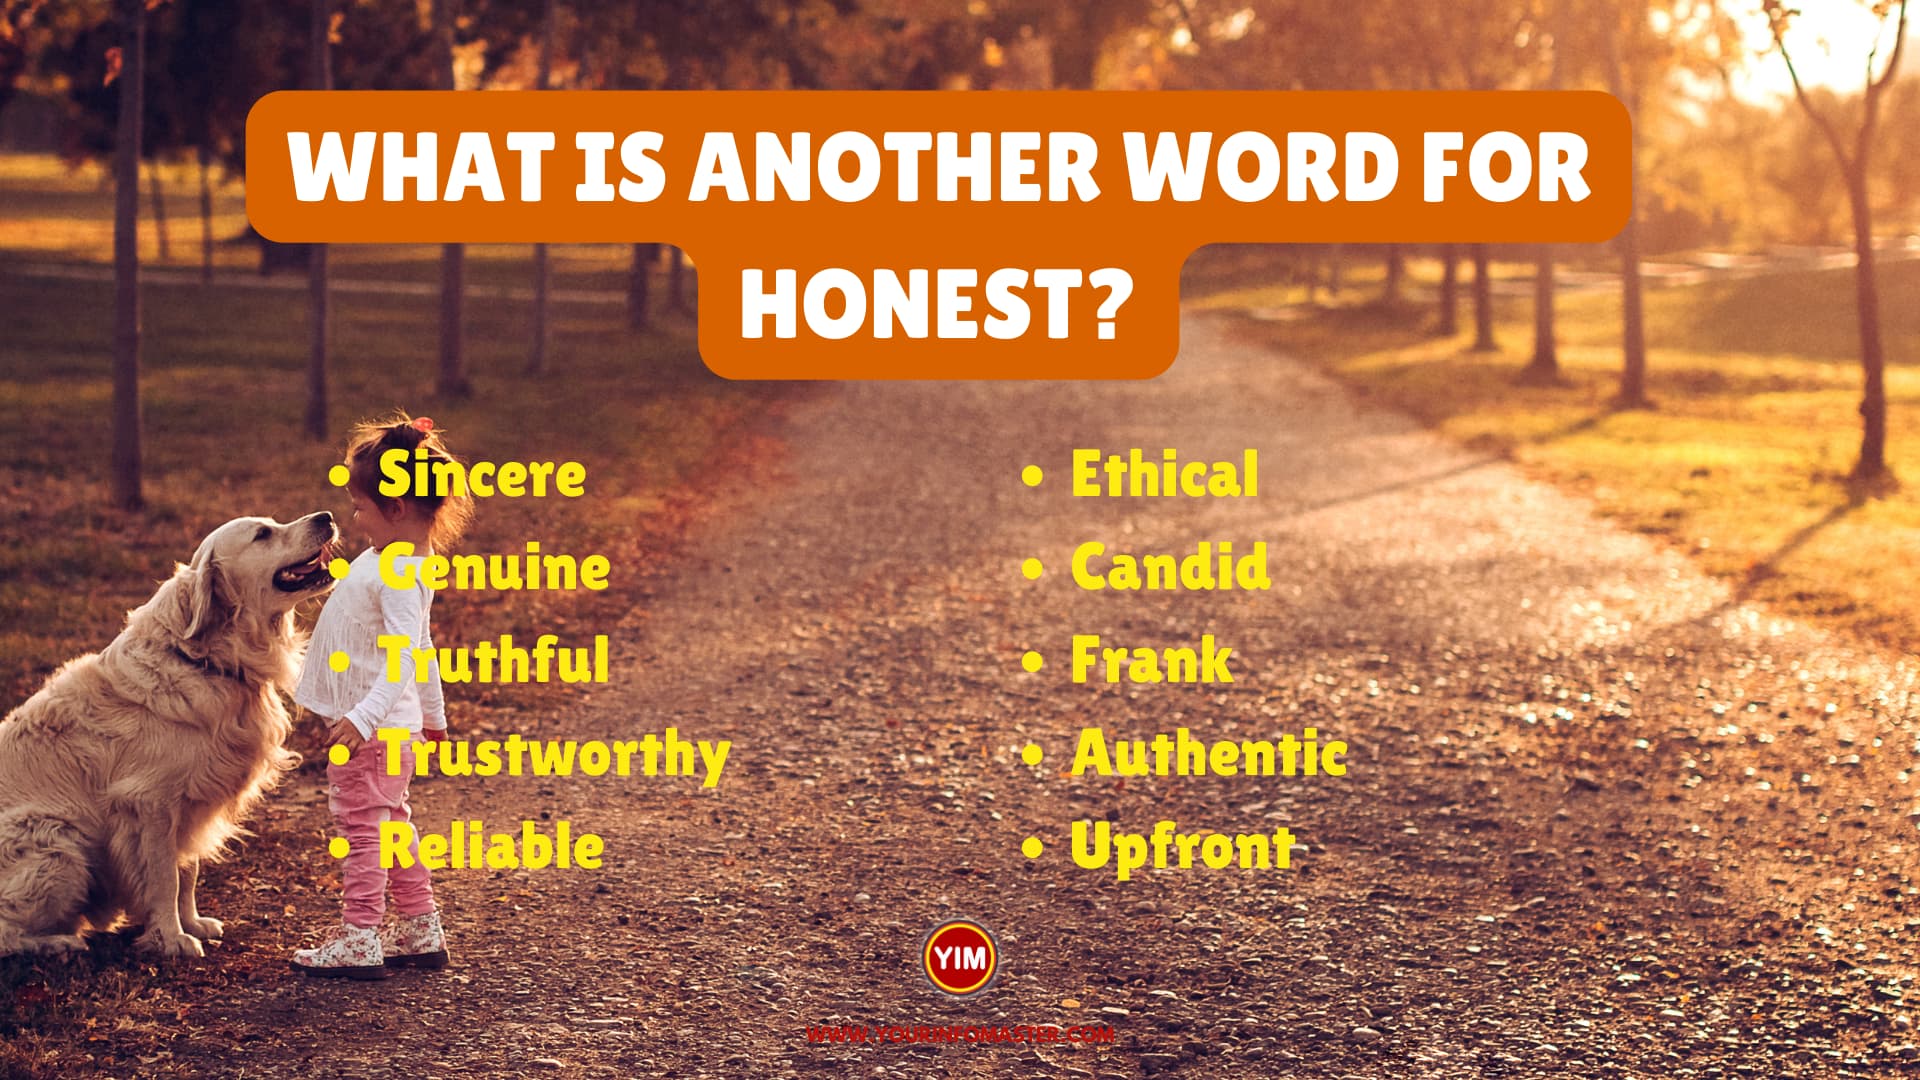 What is another word for Honest